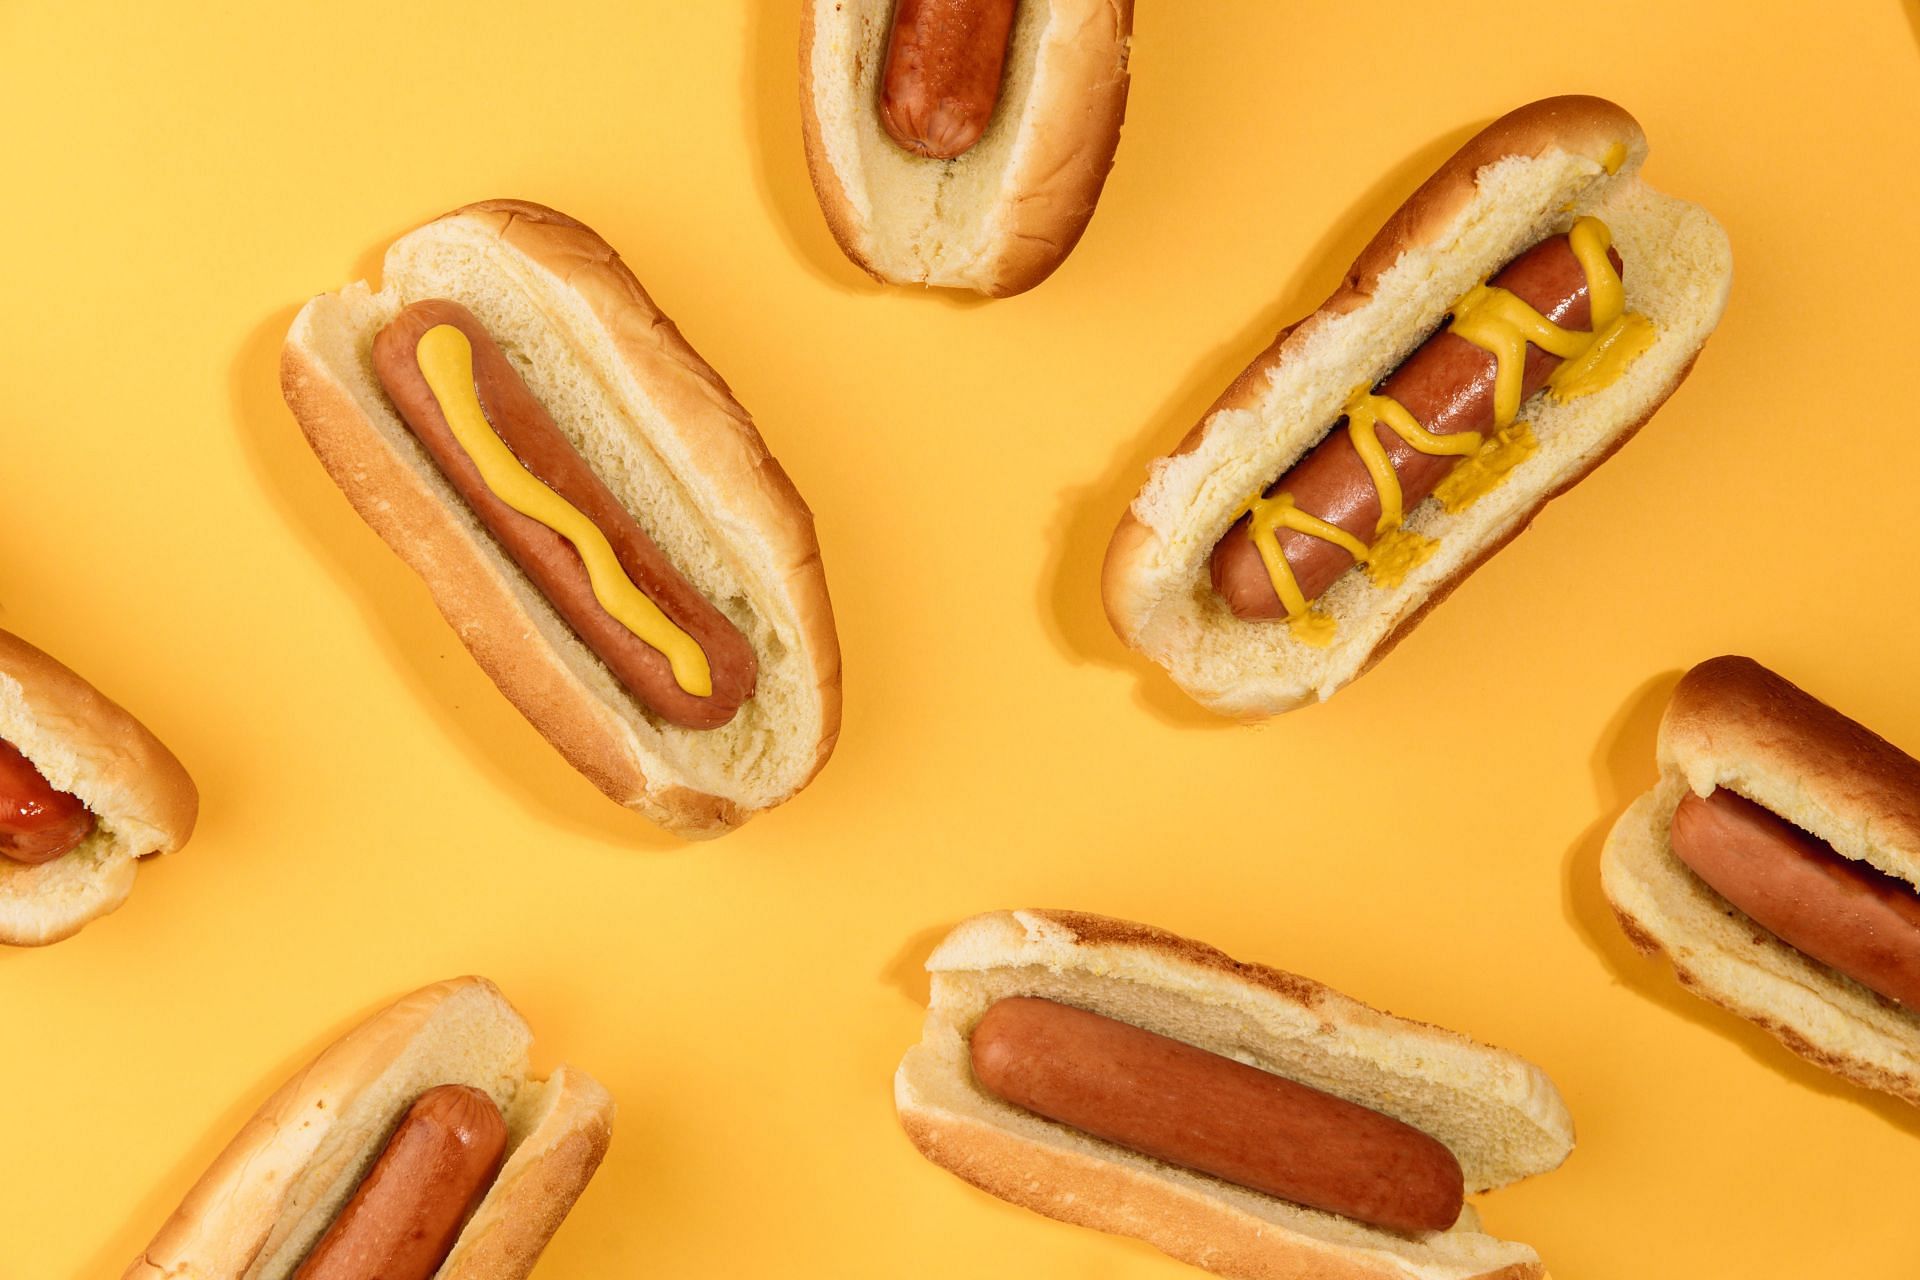 Hot dogs can be carcinogenic (Image via Unsplash / Ball Parl Brand)